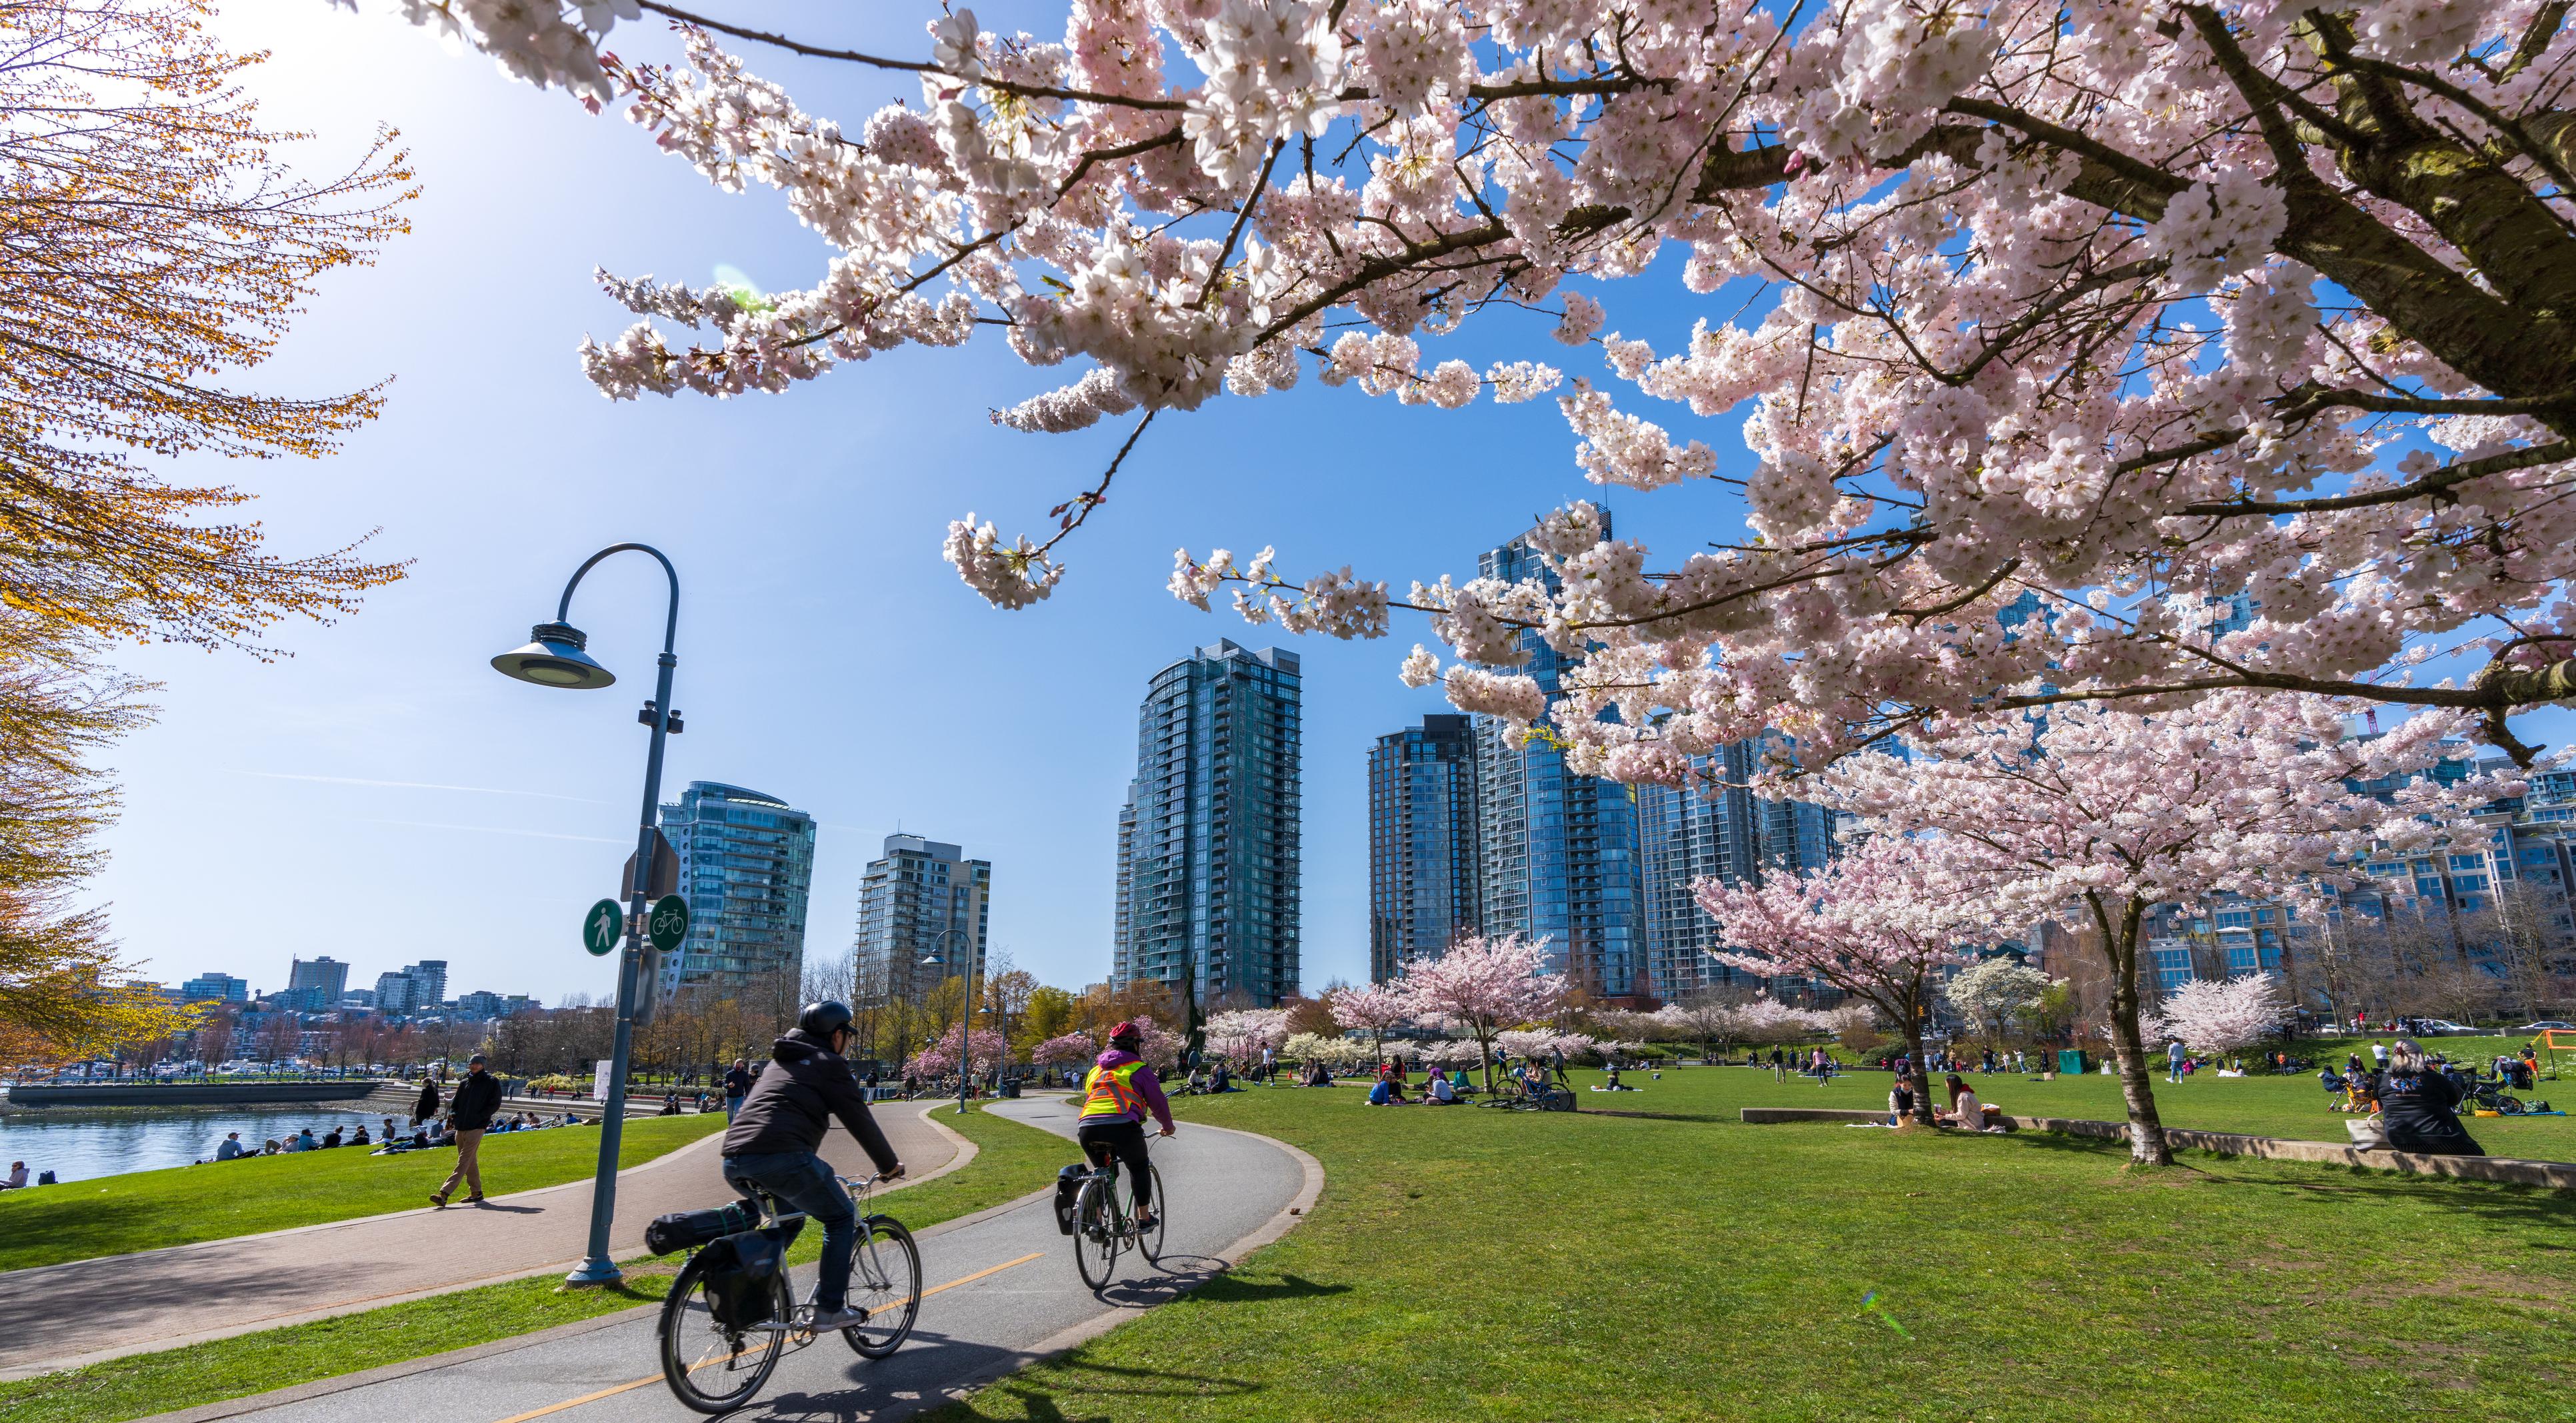 People doing cycling and having a picnic in David Lam Park in springtime.